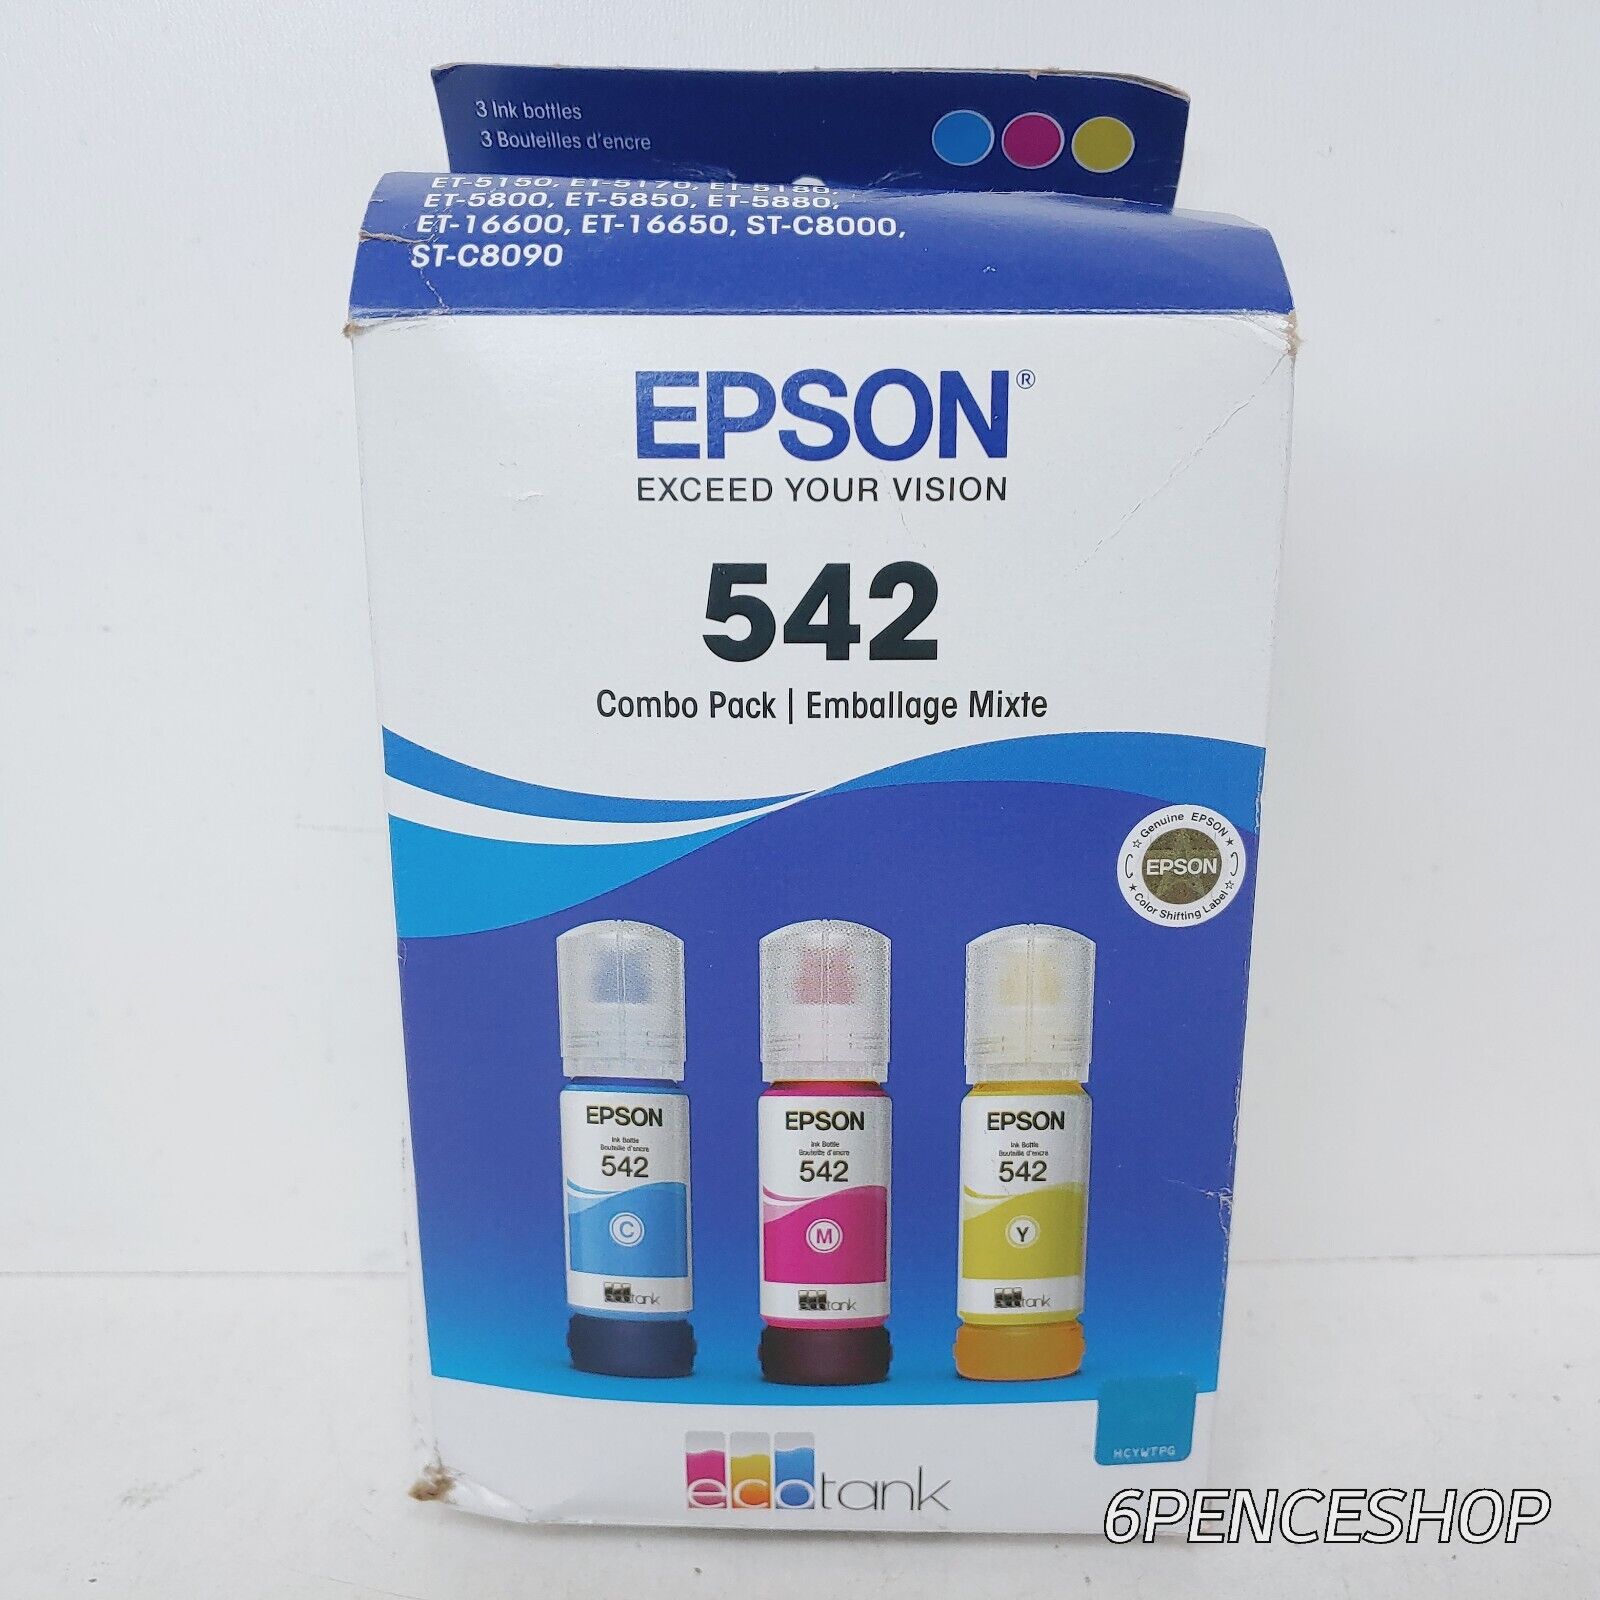 *Imperfect Box* Epson EcoTank 542 Color Ink Cartridge Combo 3-Pack  Exp 01/2028